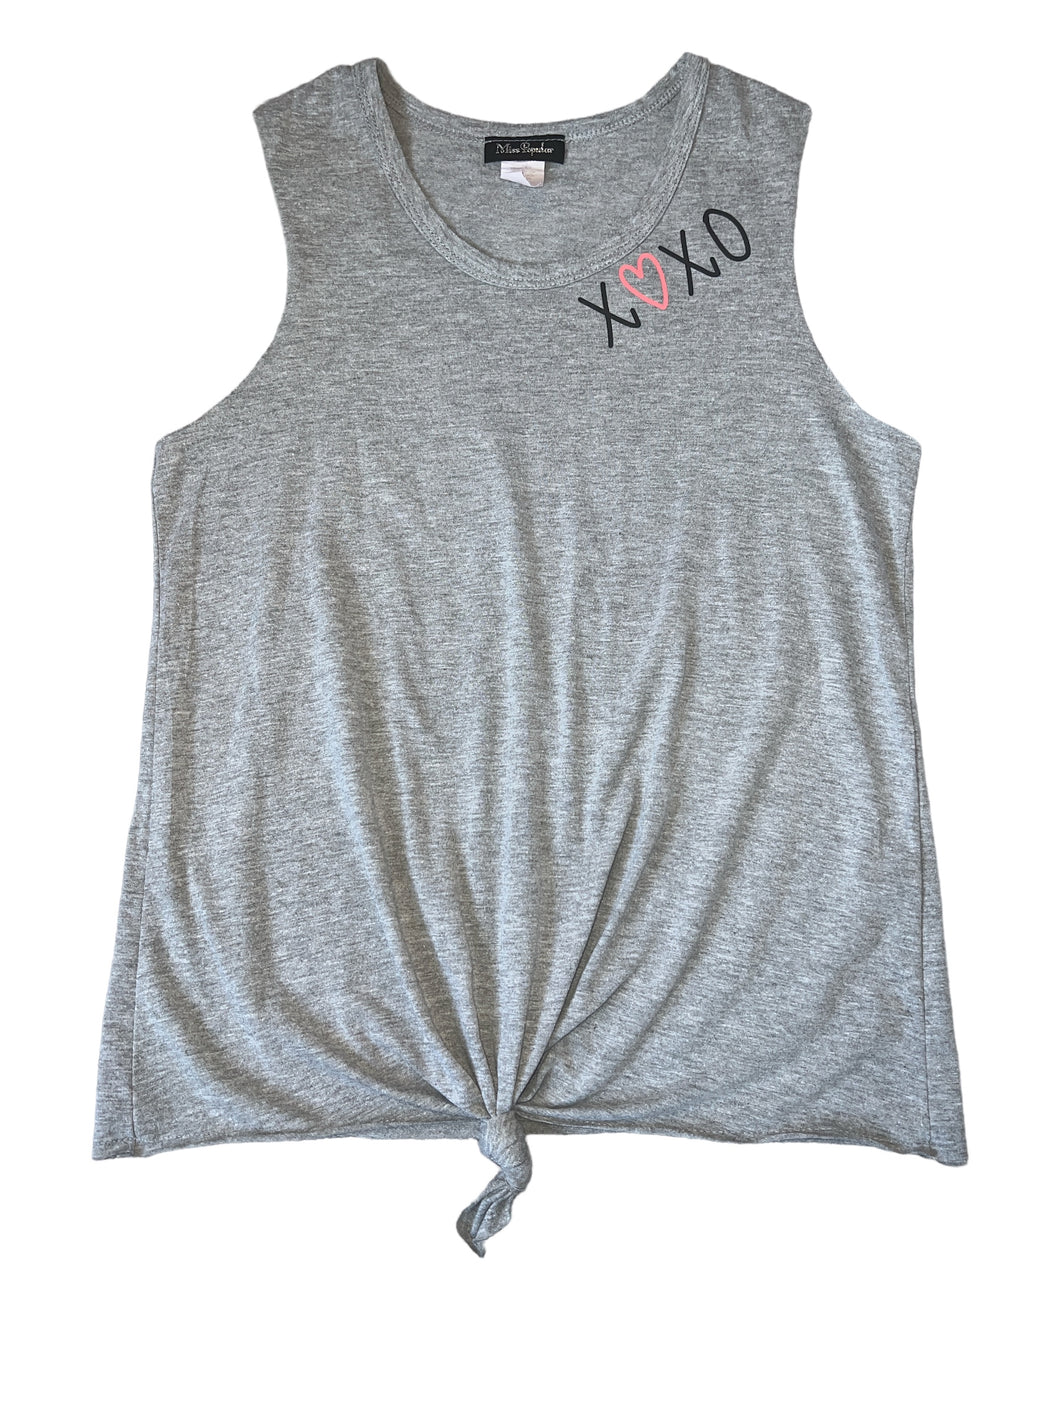 Miss Popular women’s knotted XOXO tank top junior S